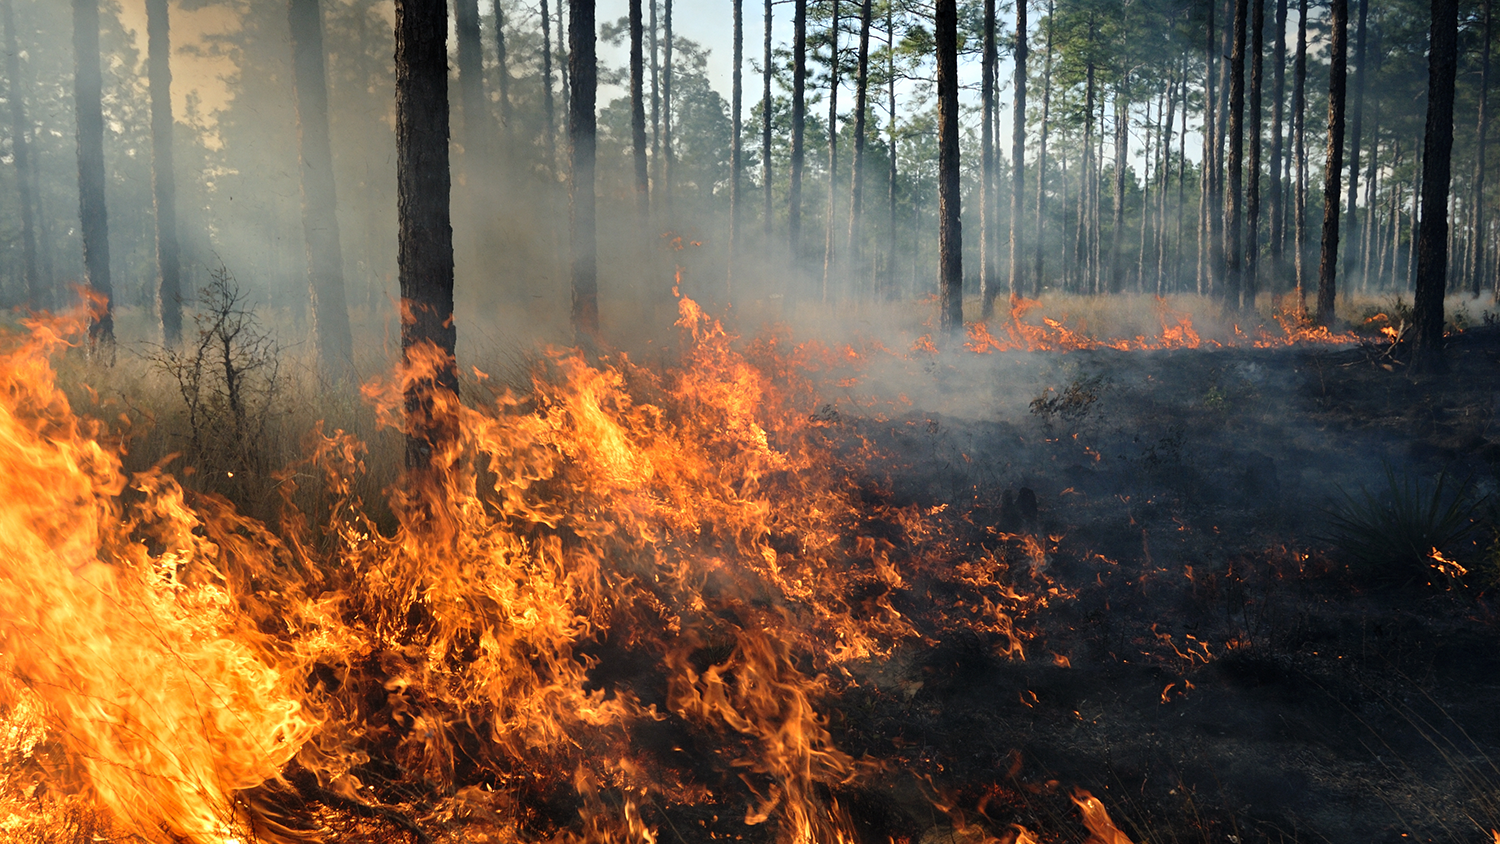 Prescribed fire in long-leaf pine forest - How Wildfires Impact Wildlife - College of Natural Resources at NC State University